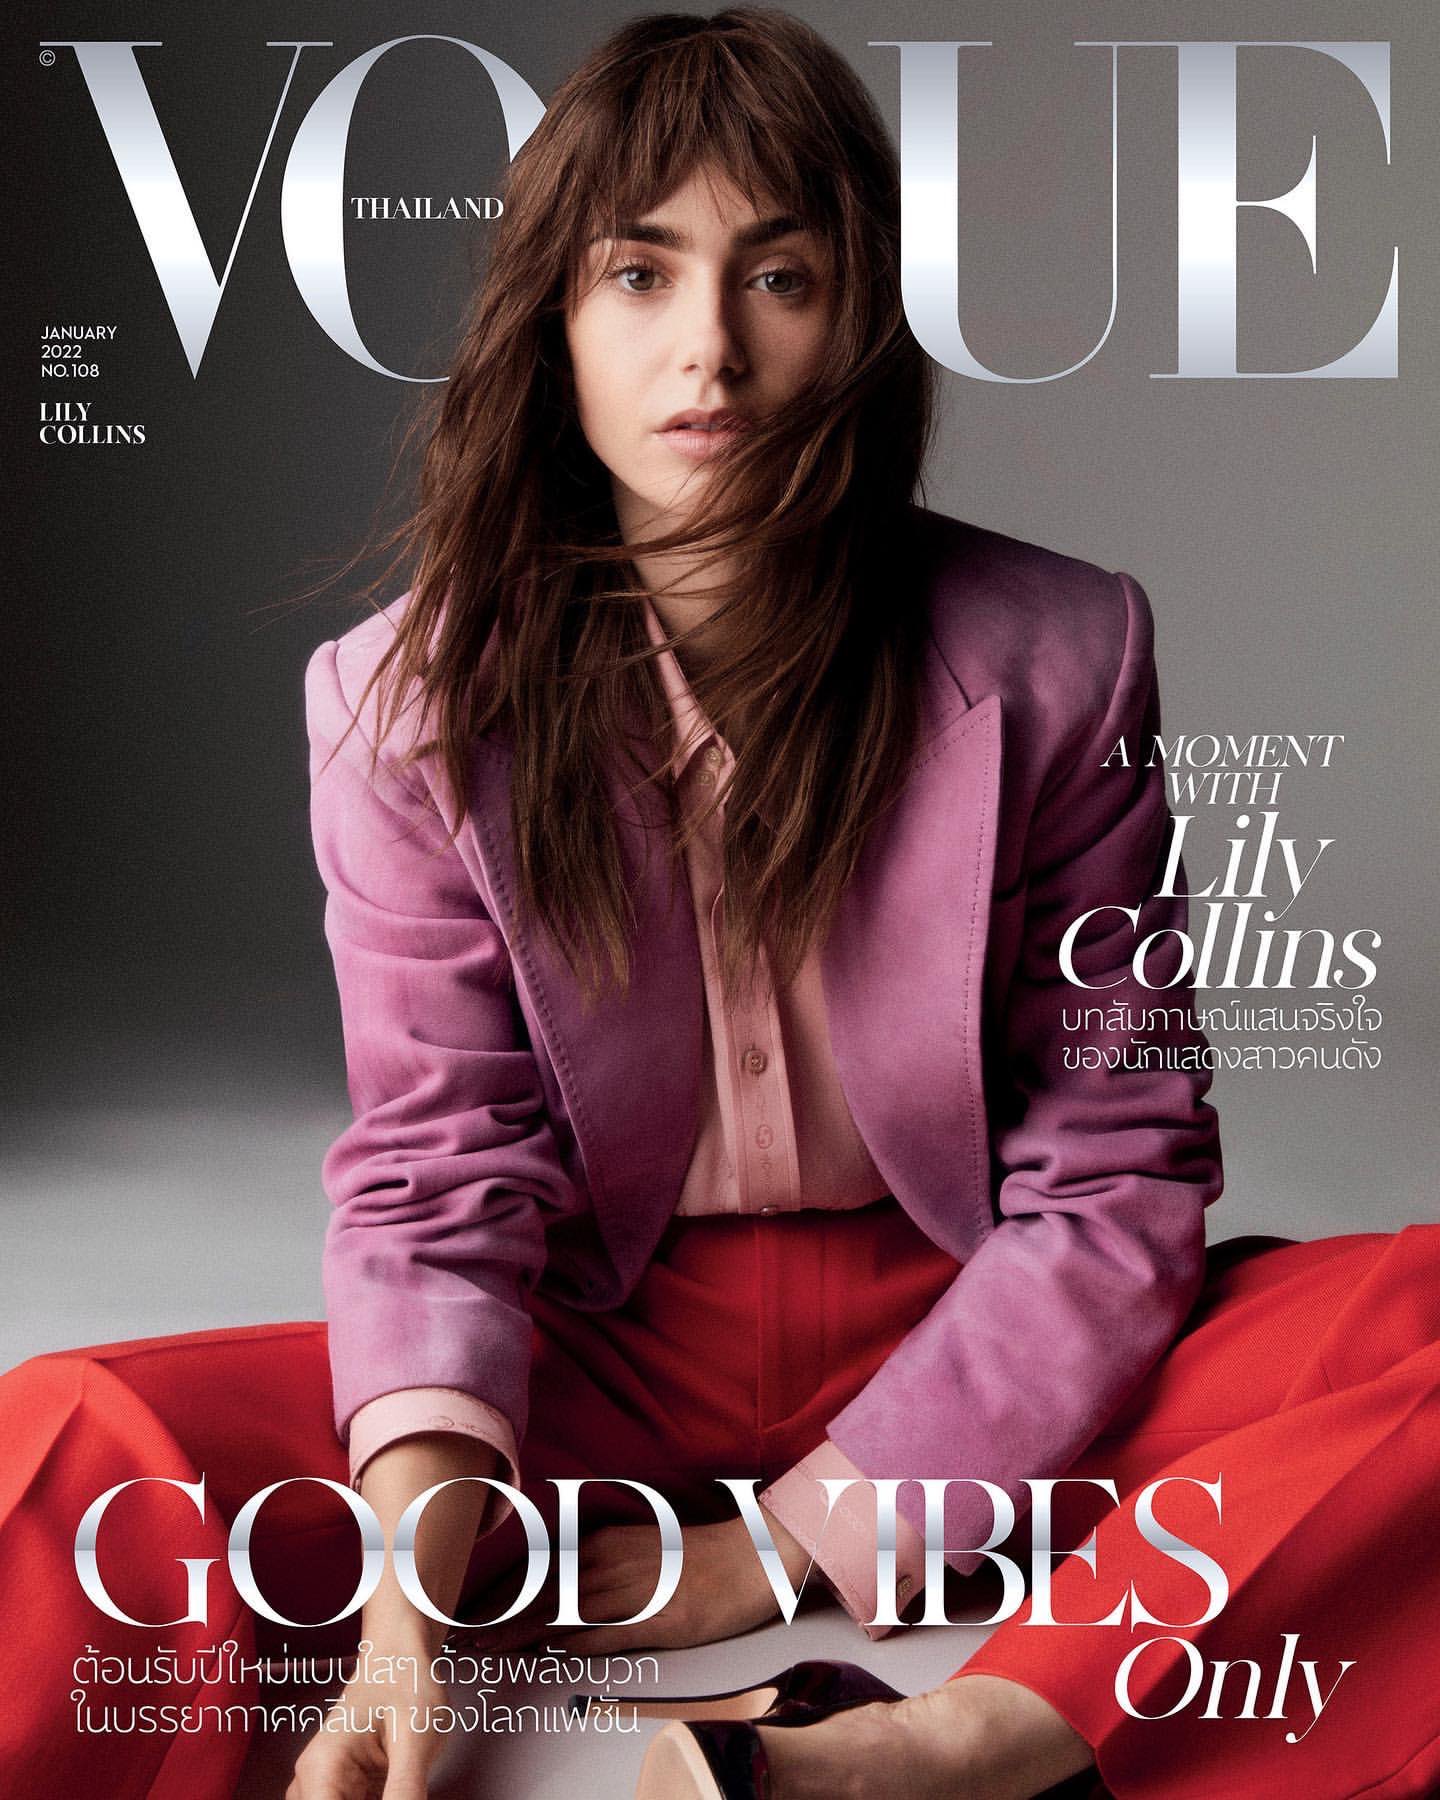 Lily Collins Covers Vogue Thailand – BeautifulBallad